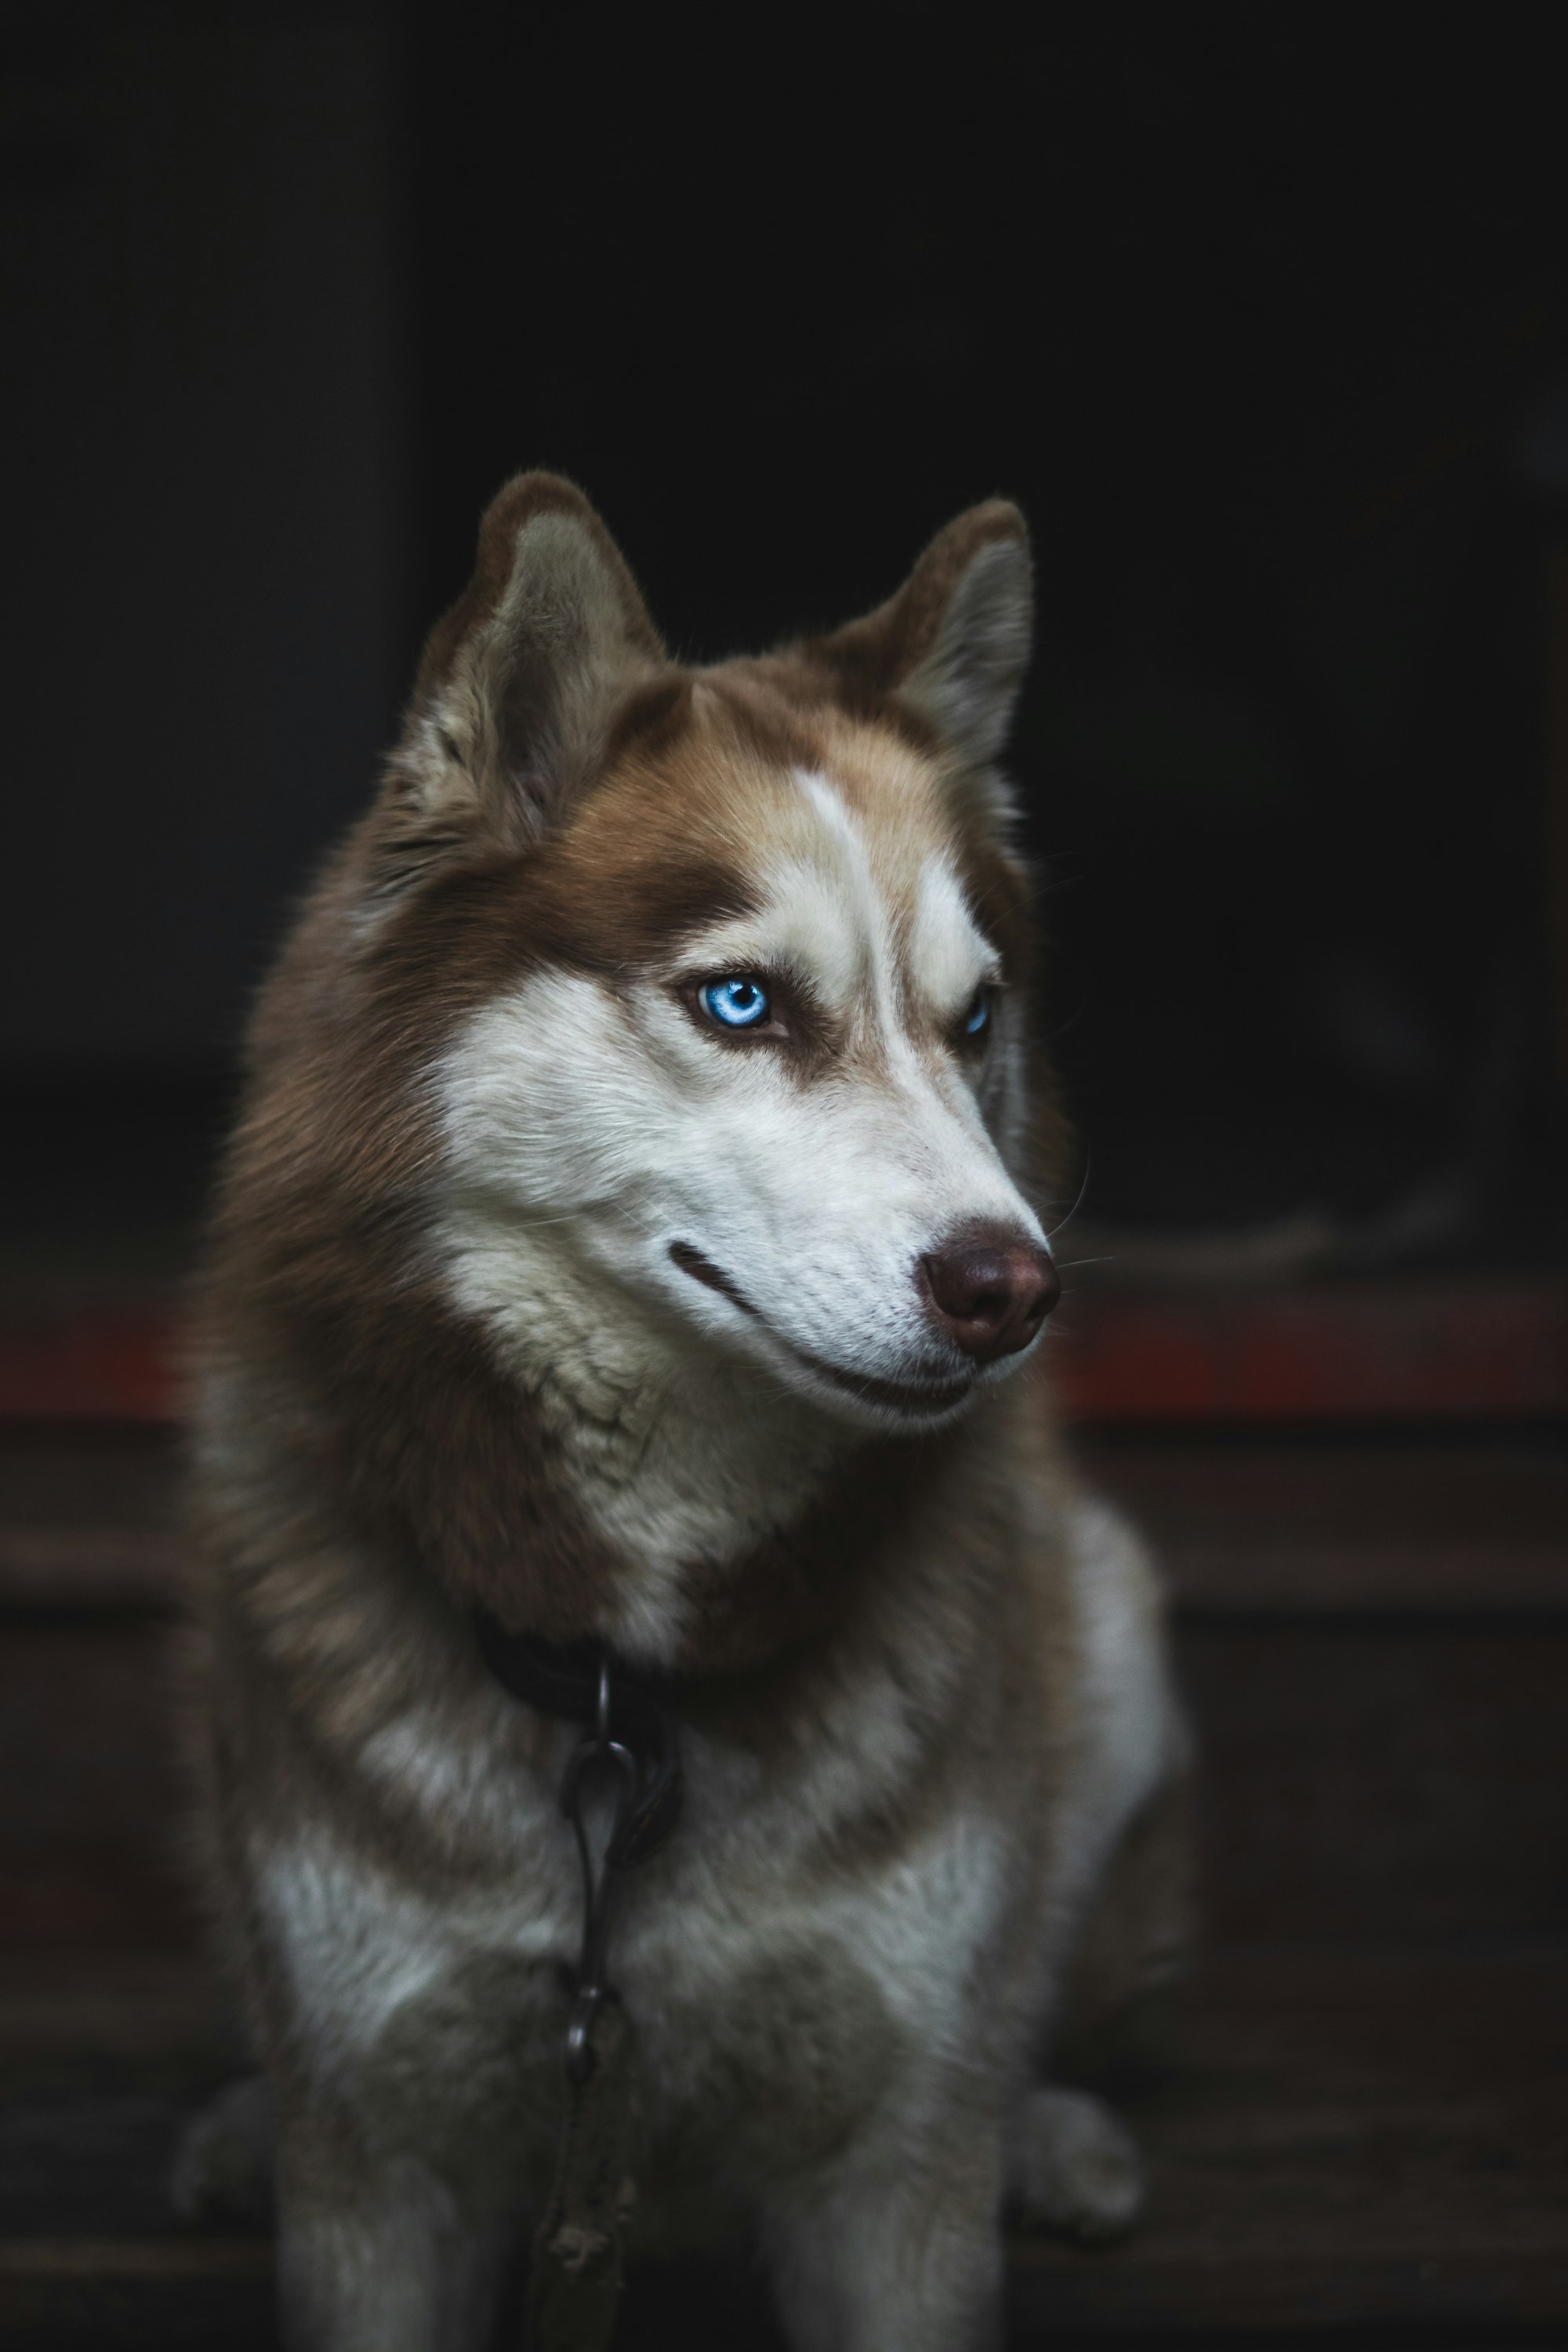 Good-looking husky with her charming eyes